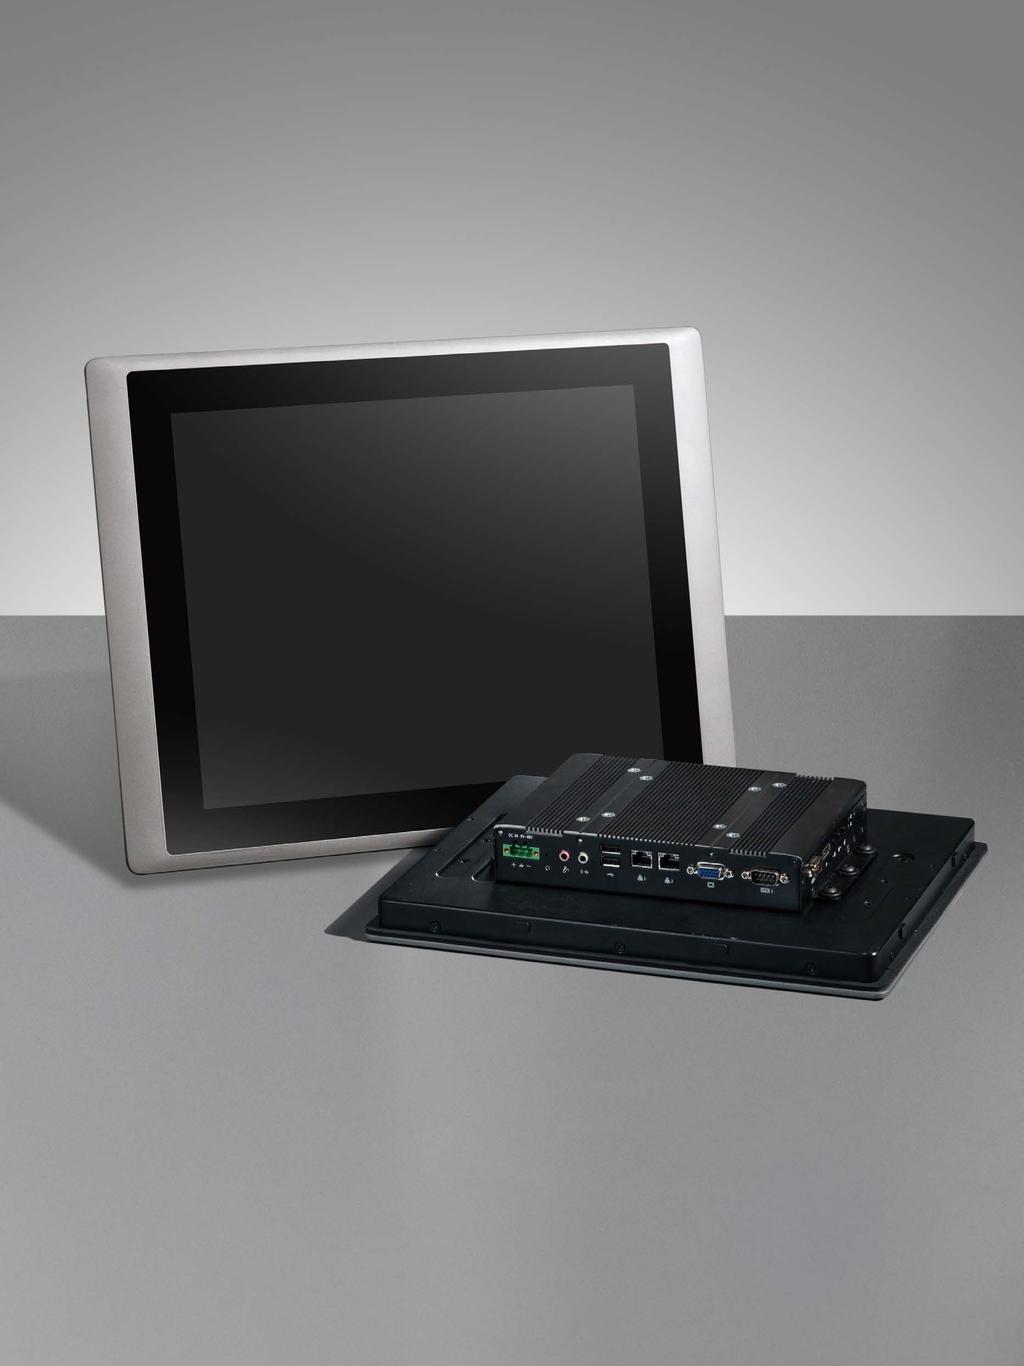 C-100/P1000 Series. Efficient Modular Panel PC 8 ~21 TFT-LCD with Resistive 5-wire / Projected Capacitive Onboard Intel Atom E3845 Quad Core, 1.91GHz 1x DDR3L SO-DIMM max.